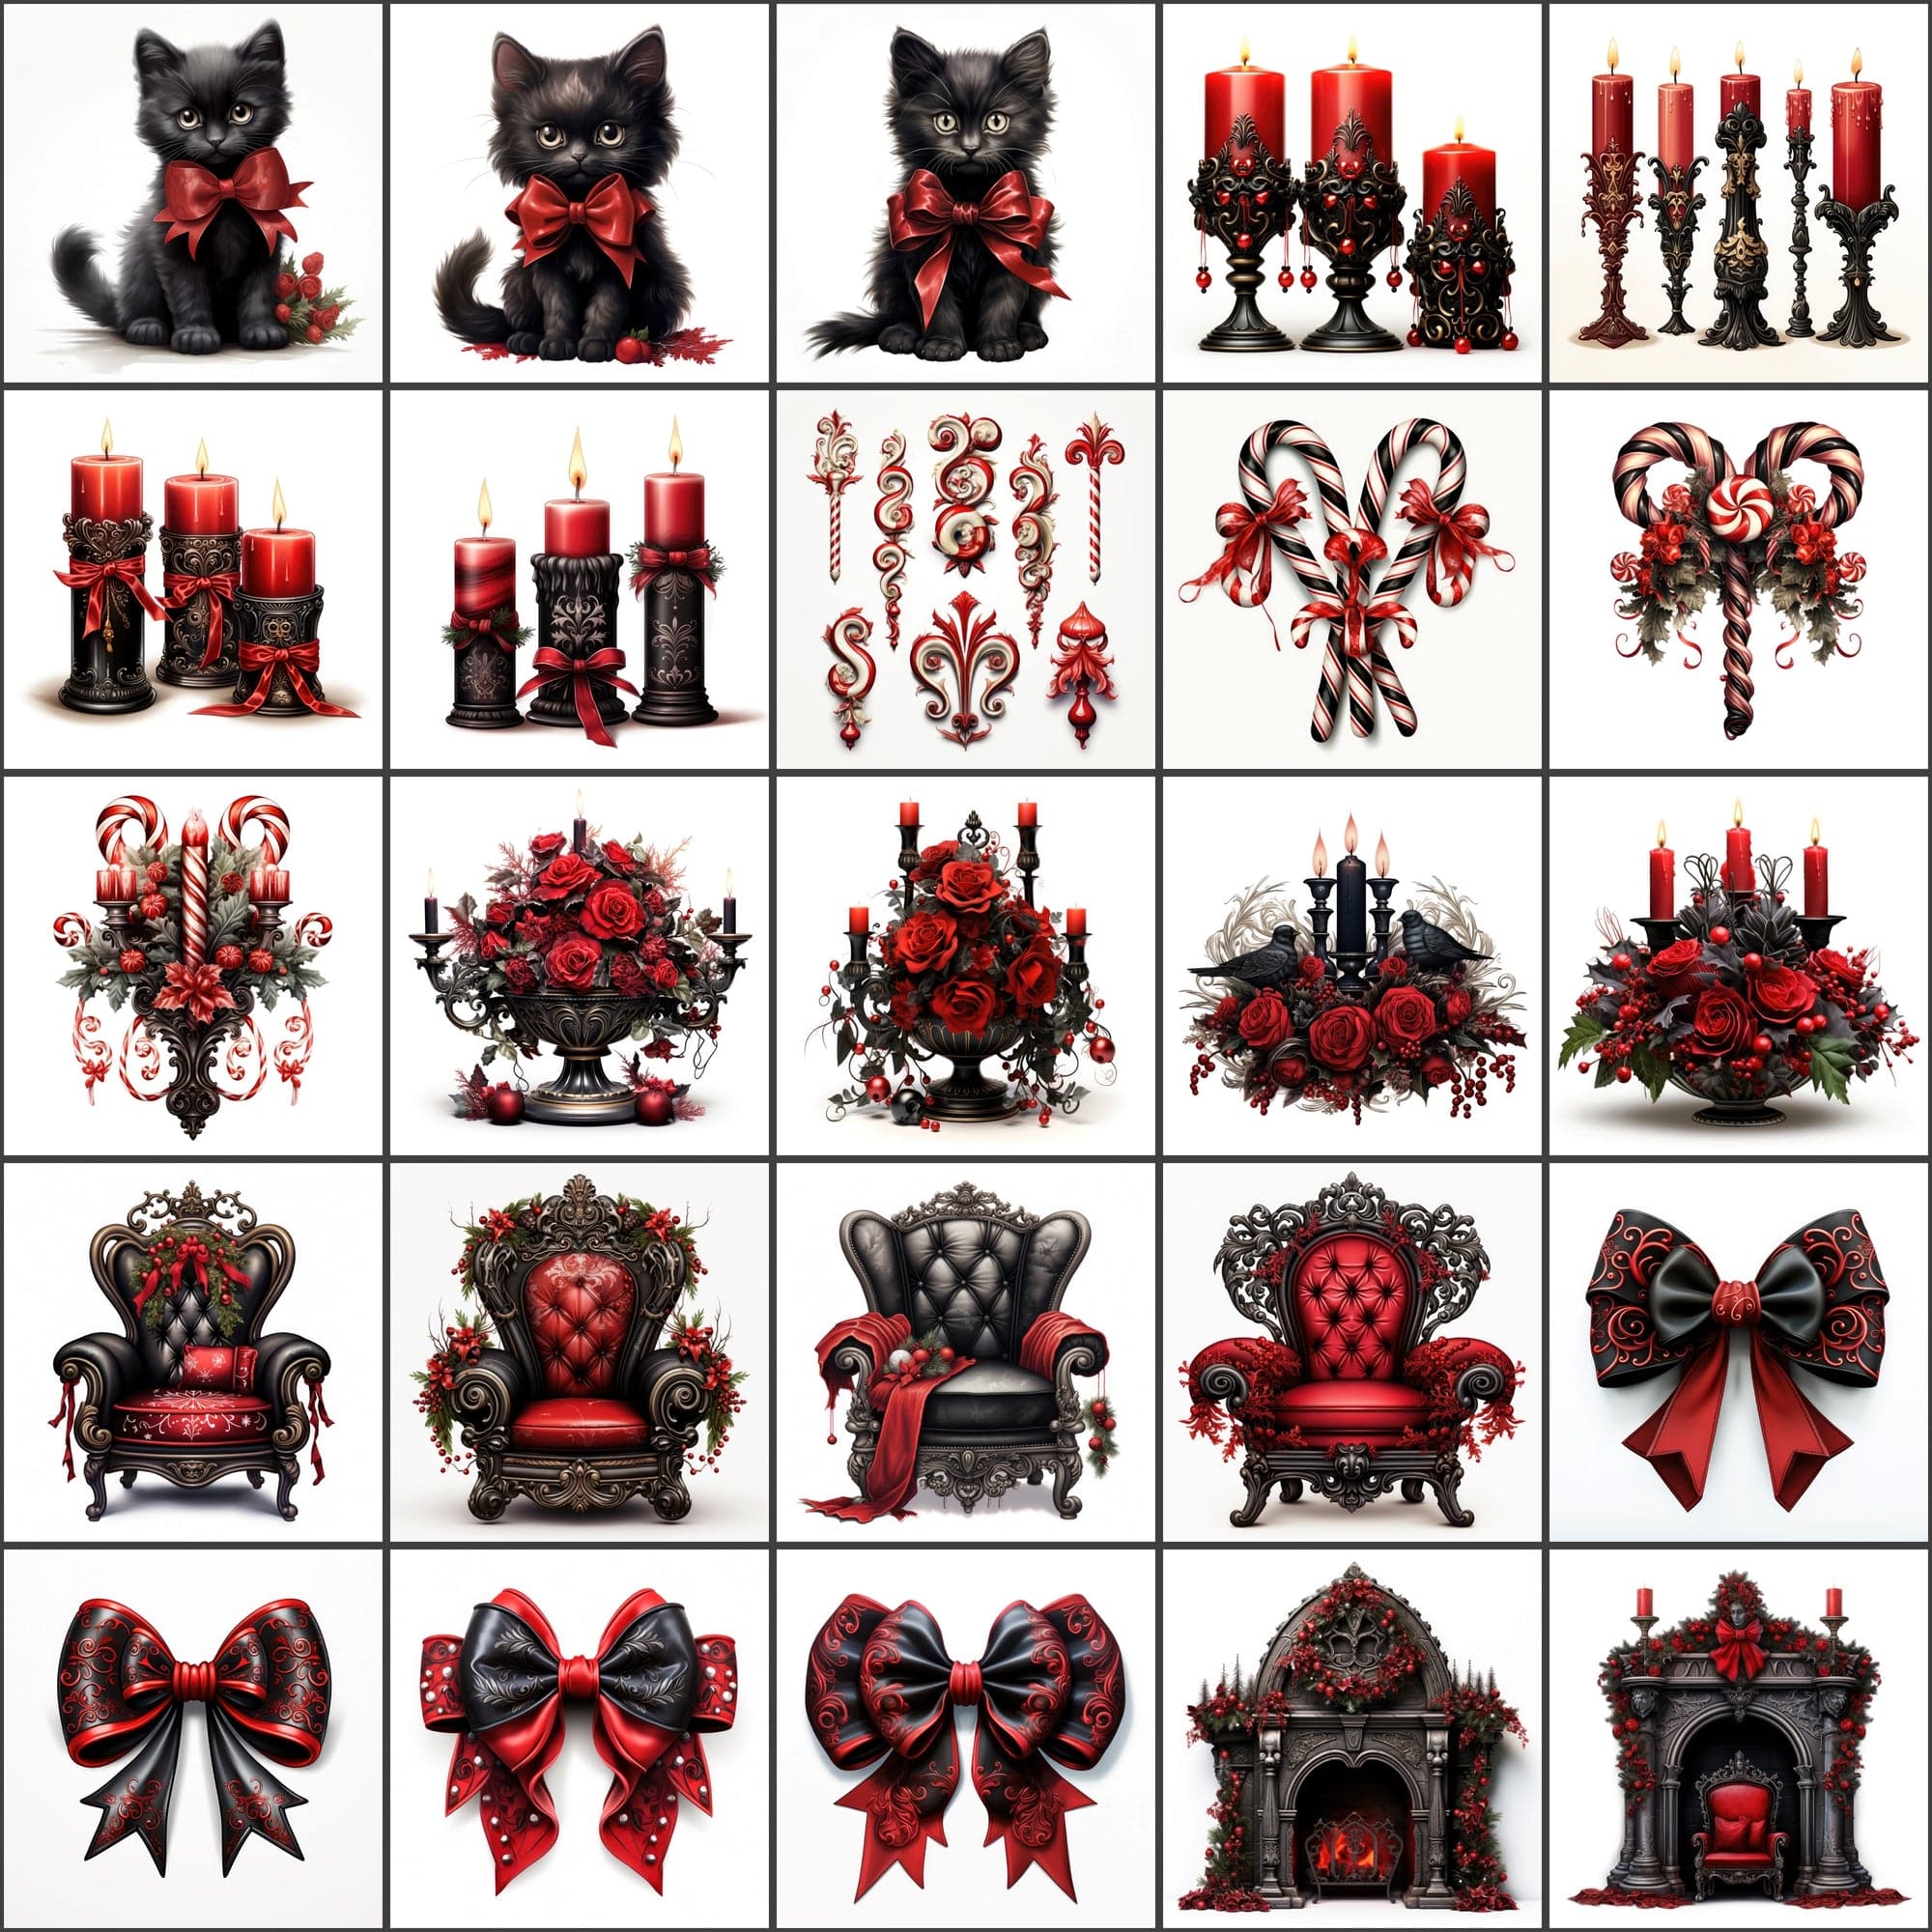 Gothic Christmas Images, Red and Black PNG, High-Resolution Digital Art, Commercial License Included Digital Download Sumobundle